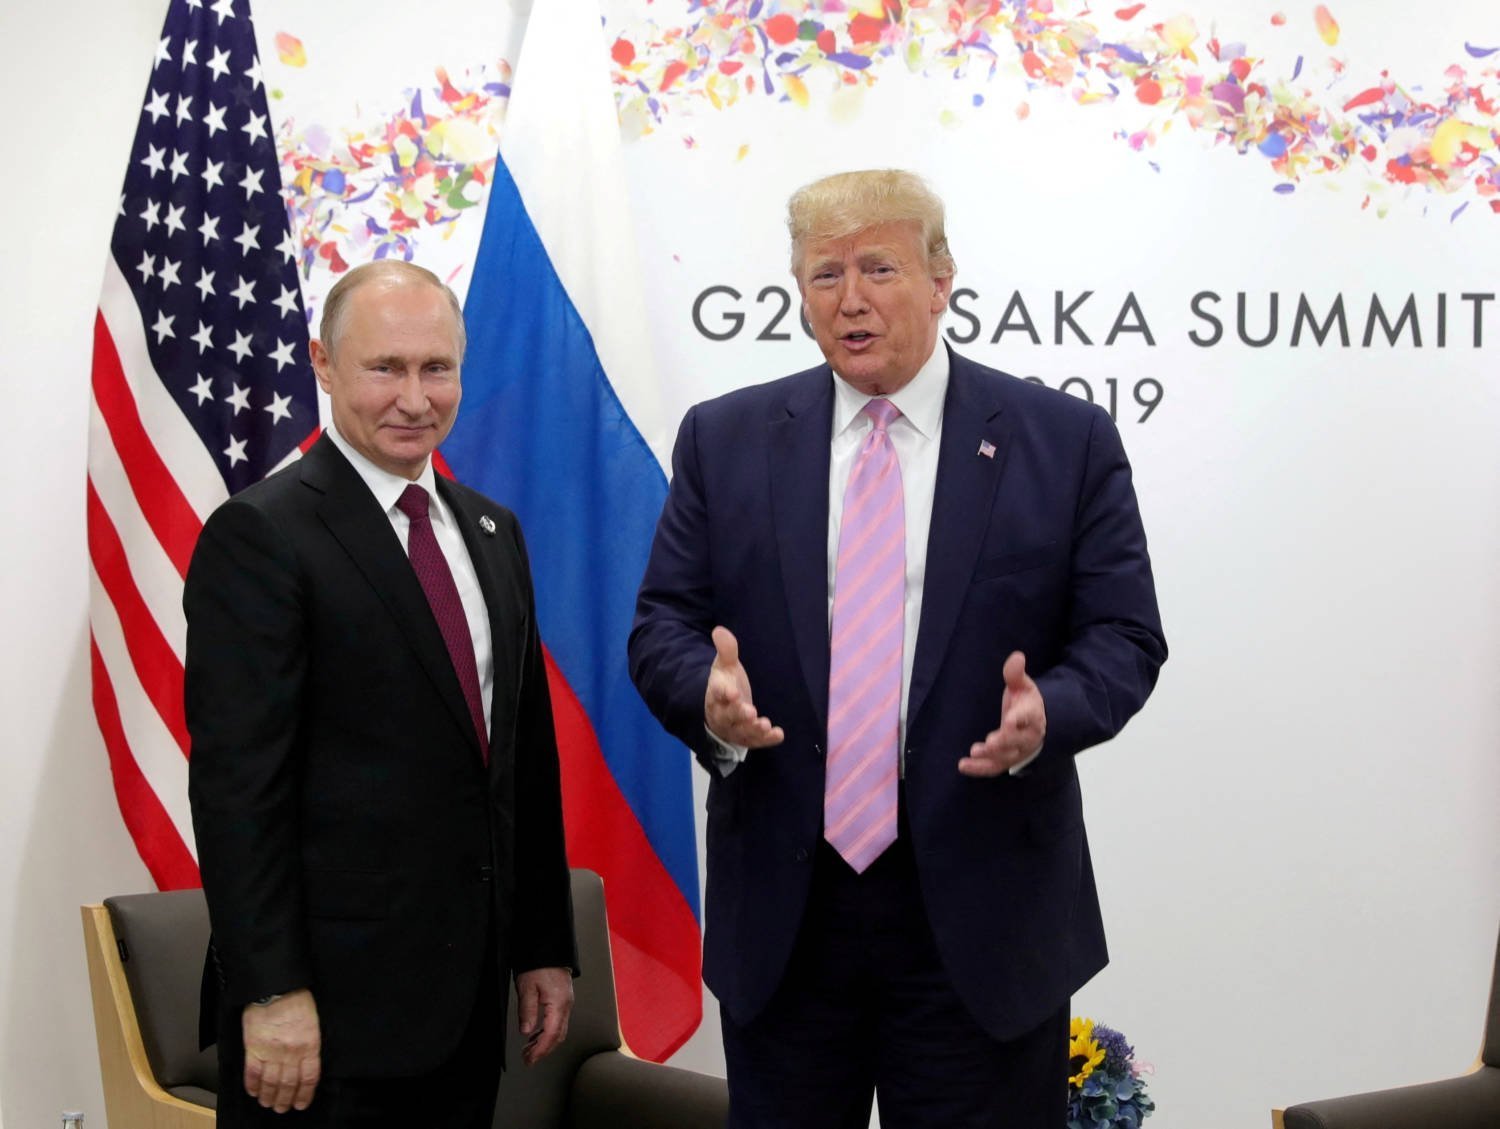 File Photo: Russia's President Vladimir Putin And U.s. President Donald Trump Attend A Meeting On The Sidelines Of The G20 Summit In Osaka